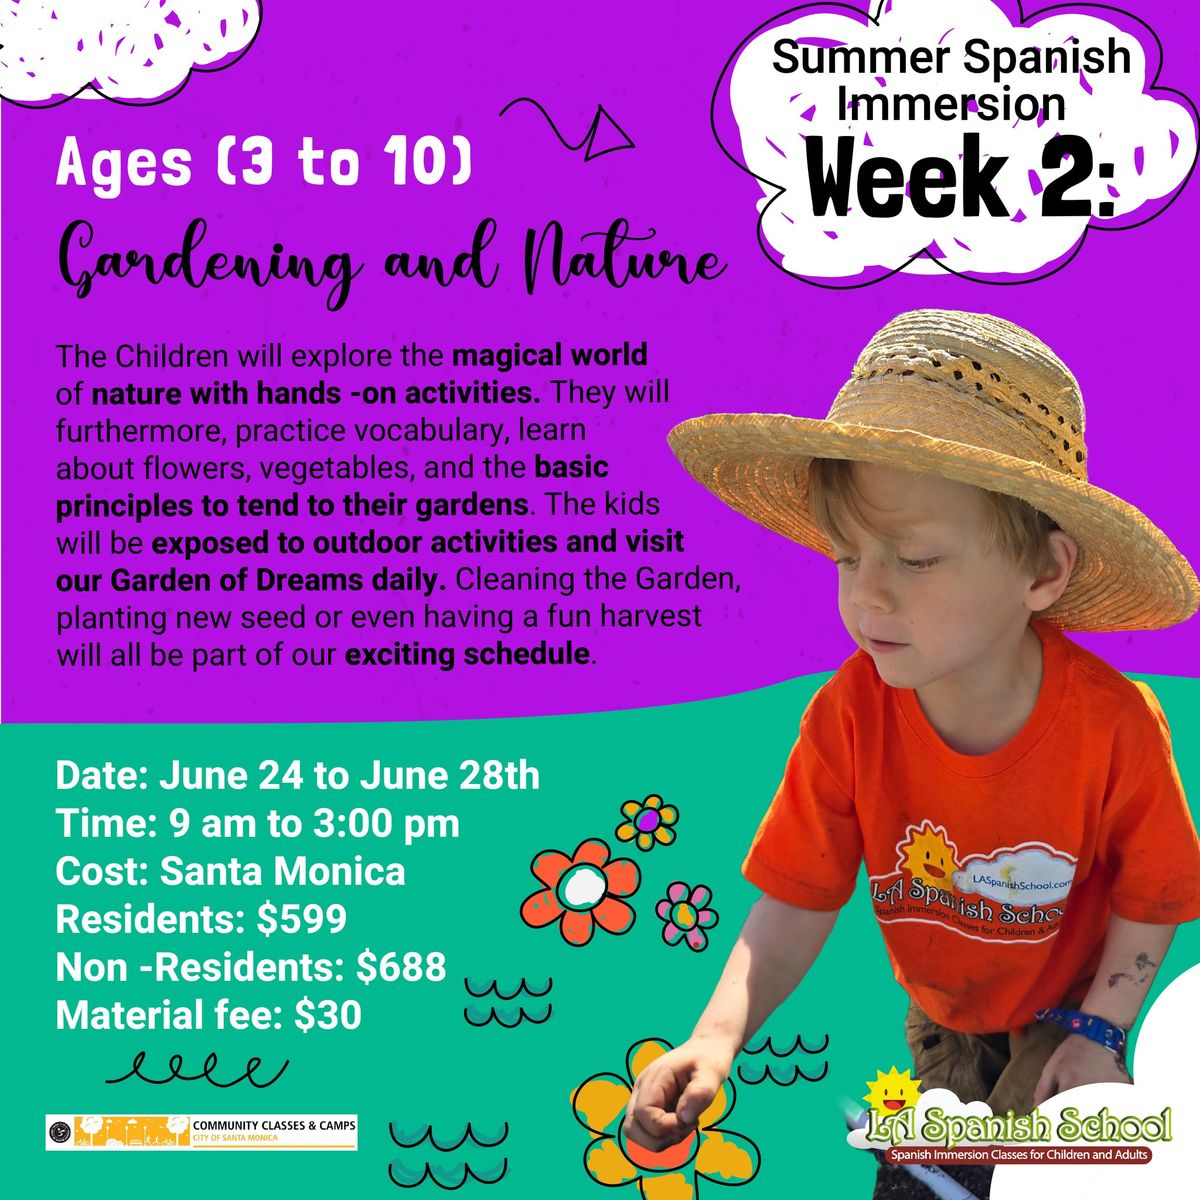 Summer Spanish Immersion Camps (Week 2)